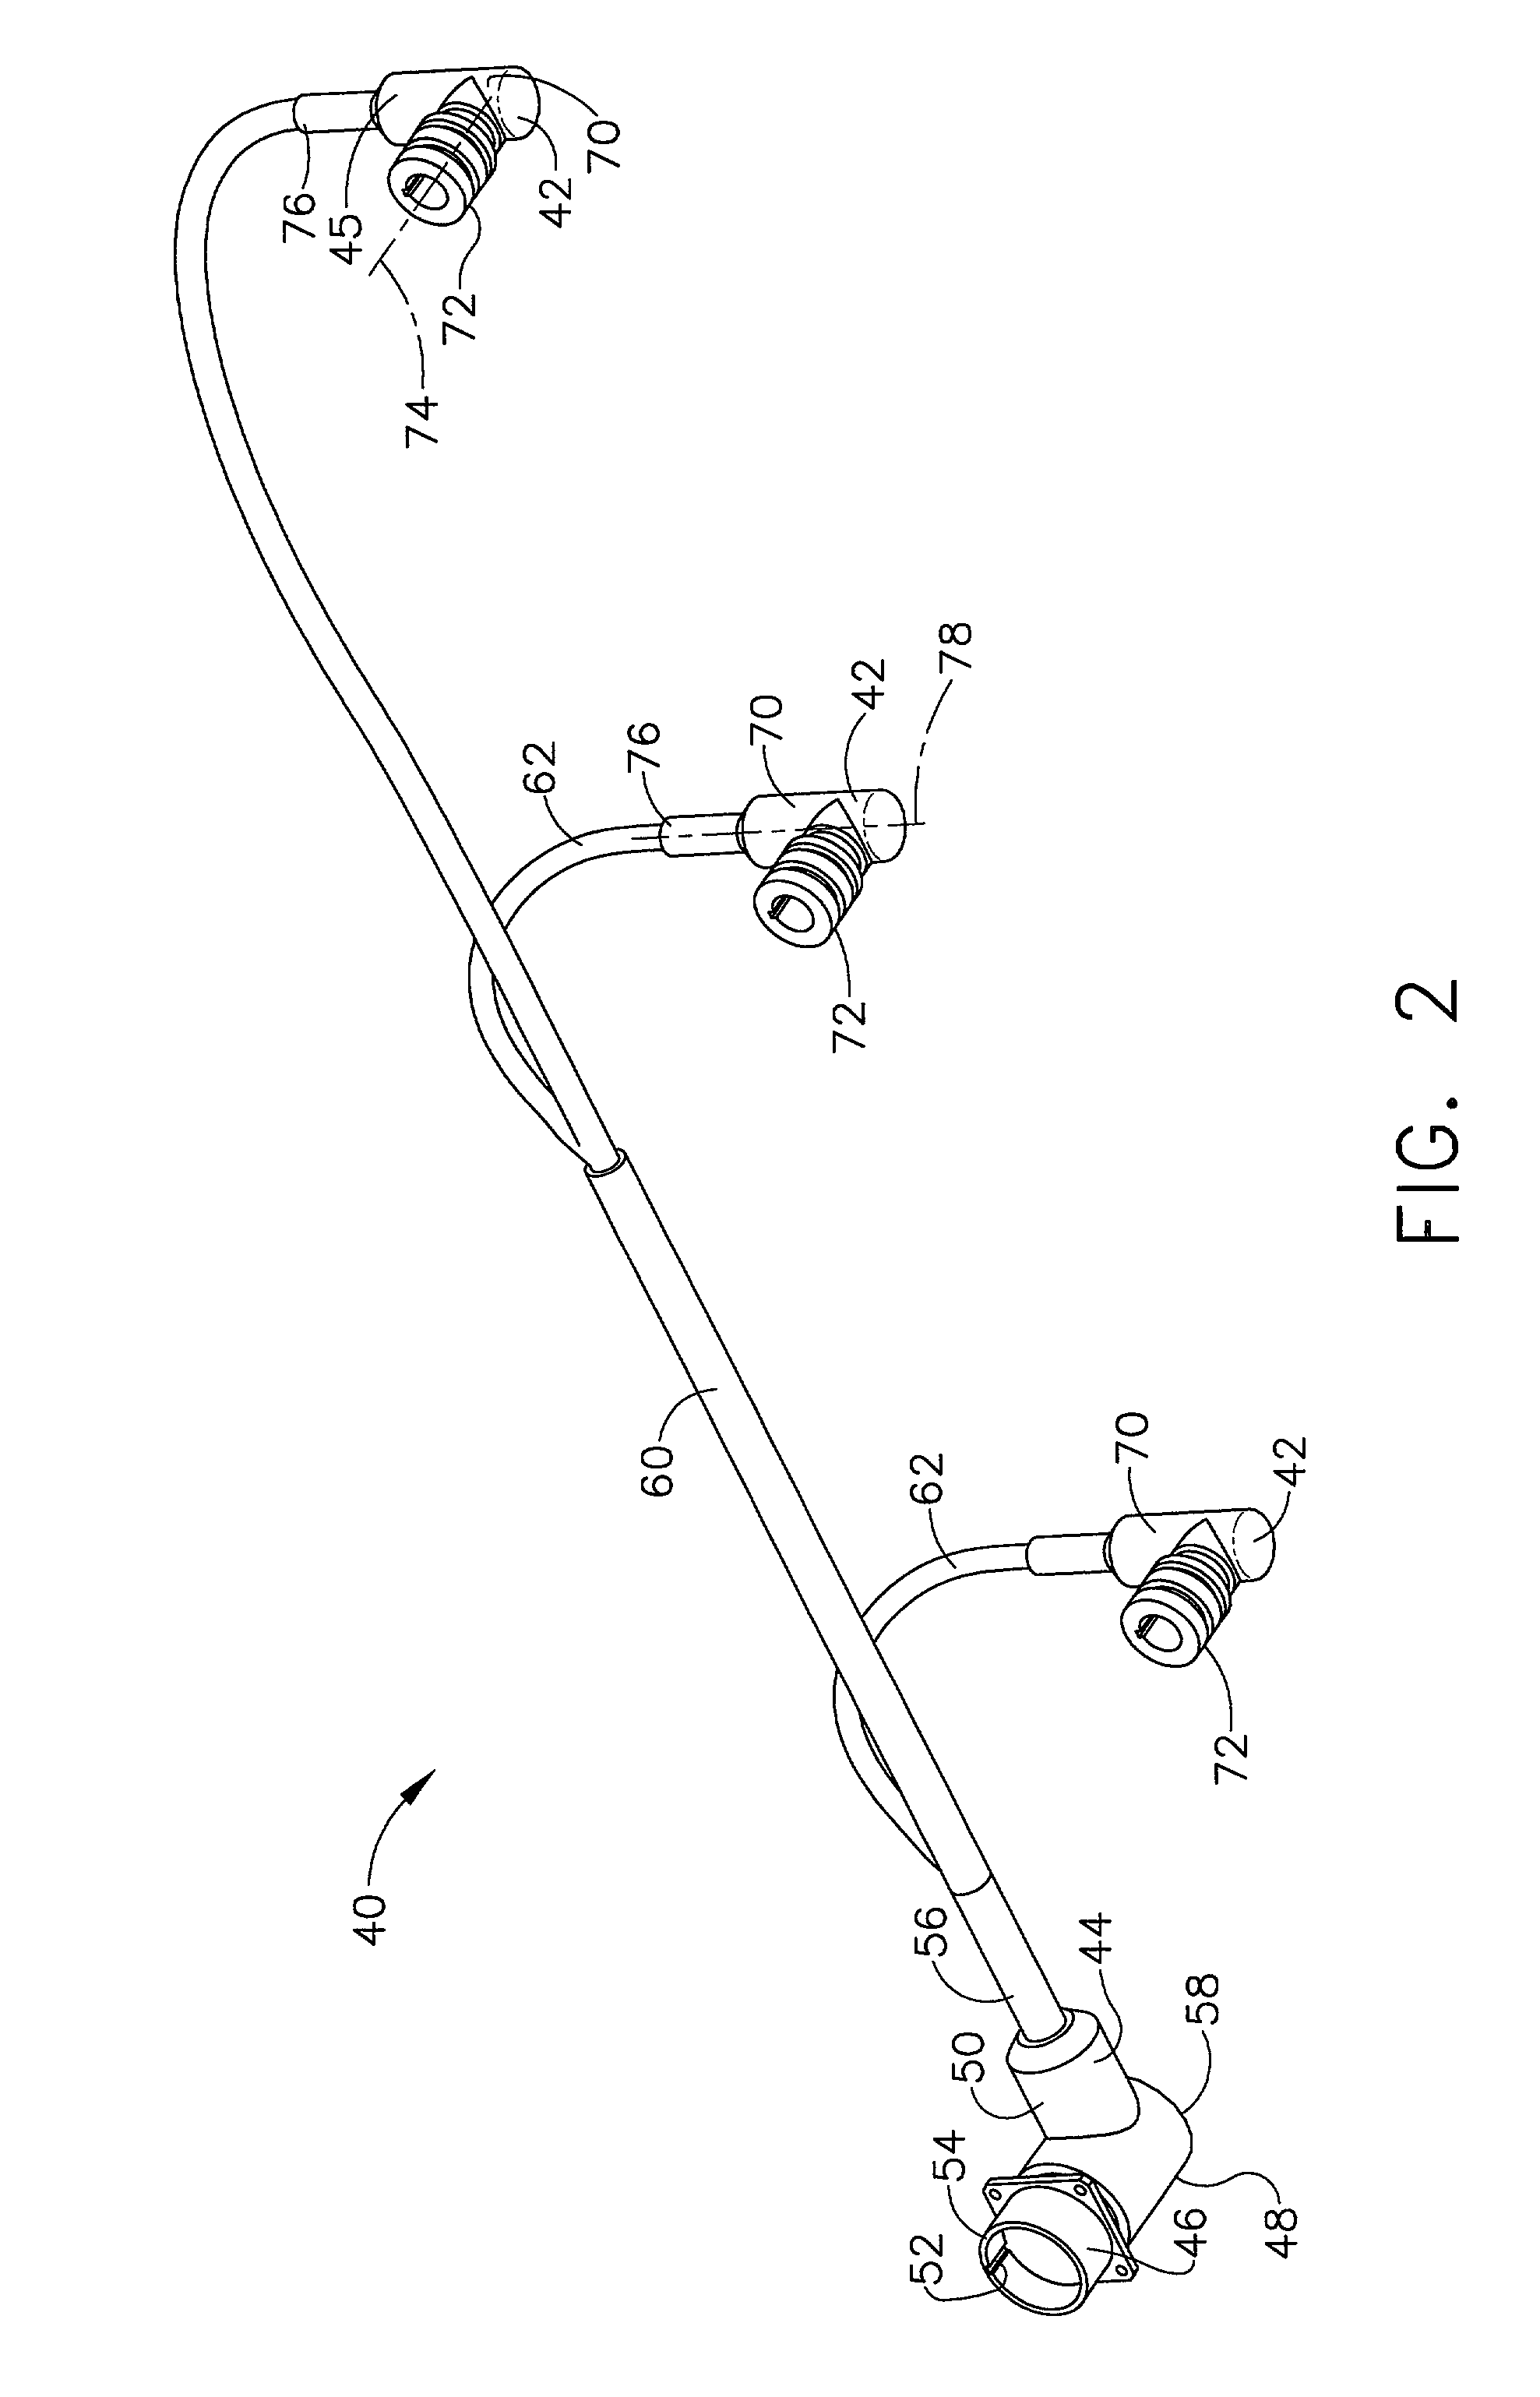 Methods and apparatus for electronically modeling aircraft engine harnesses